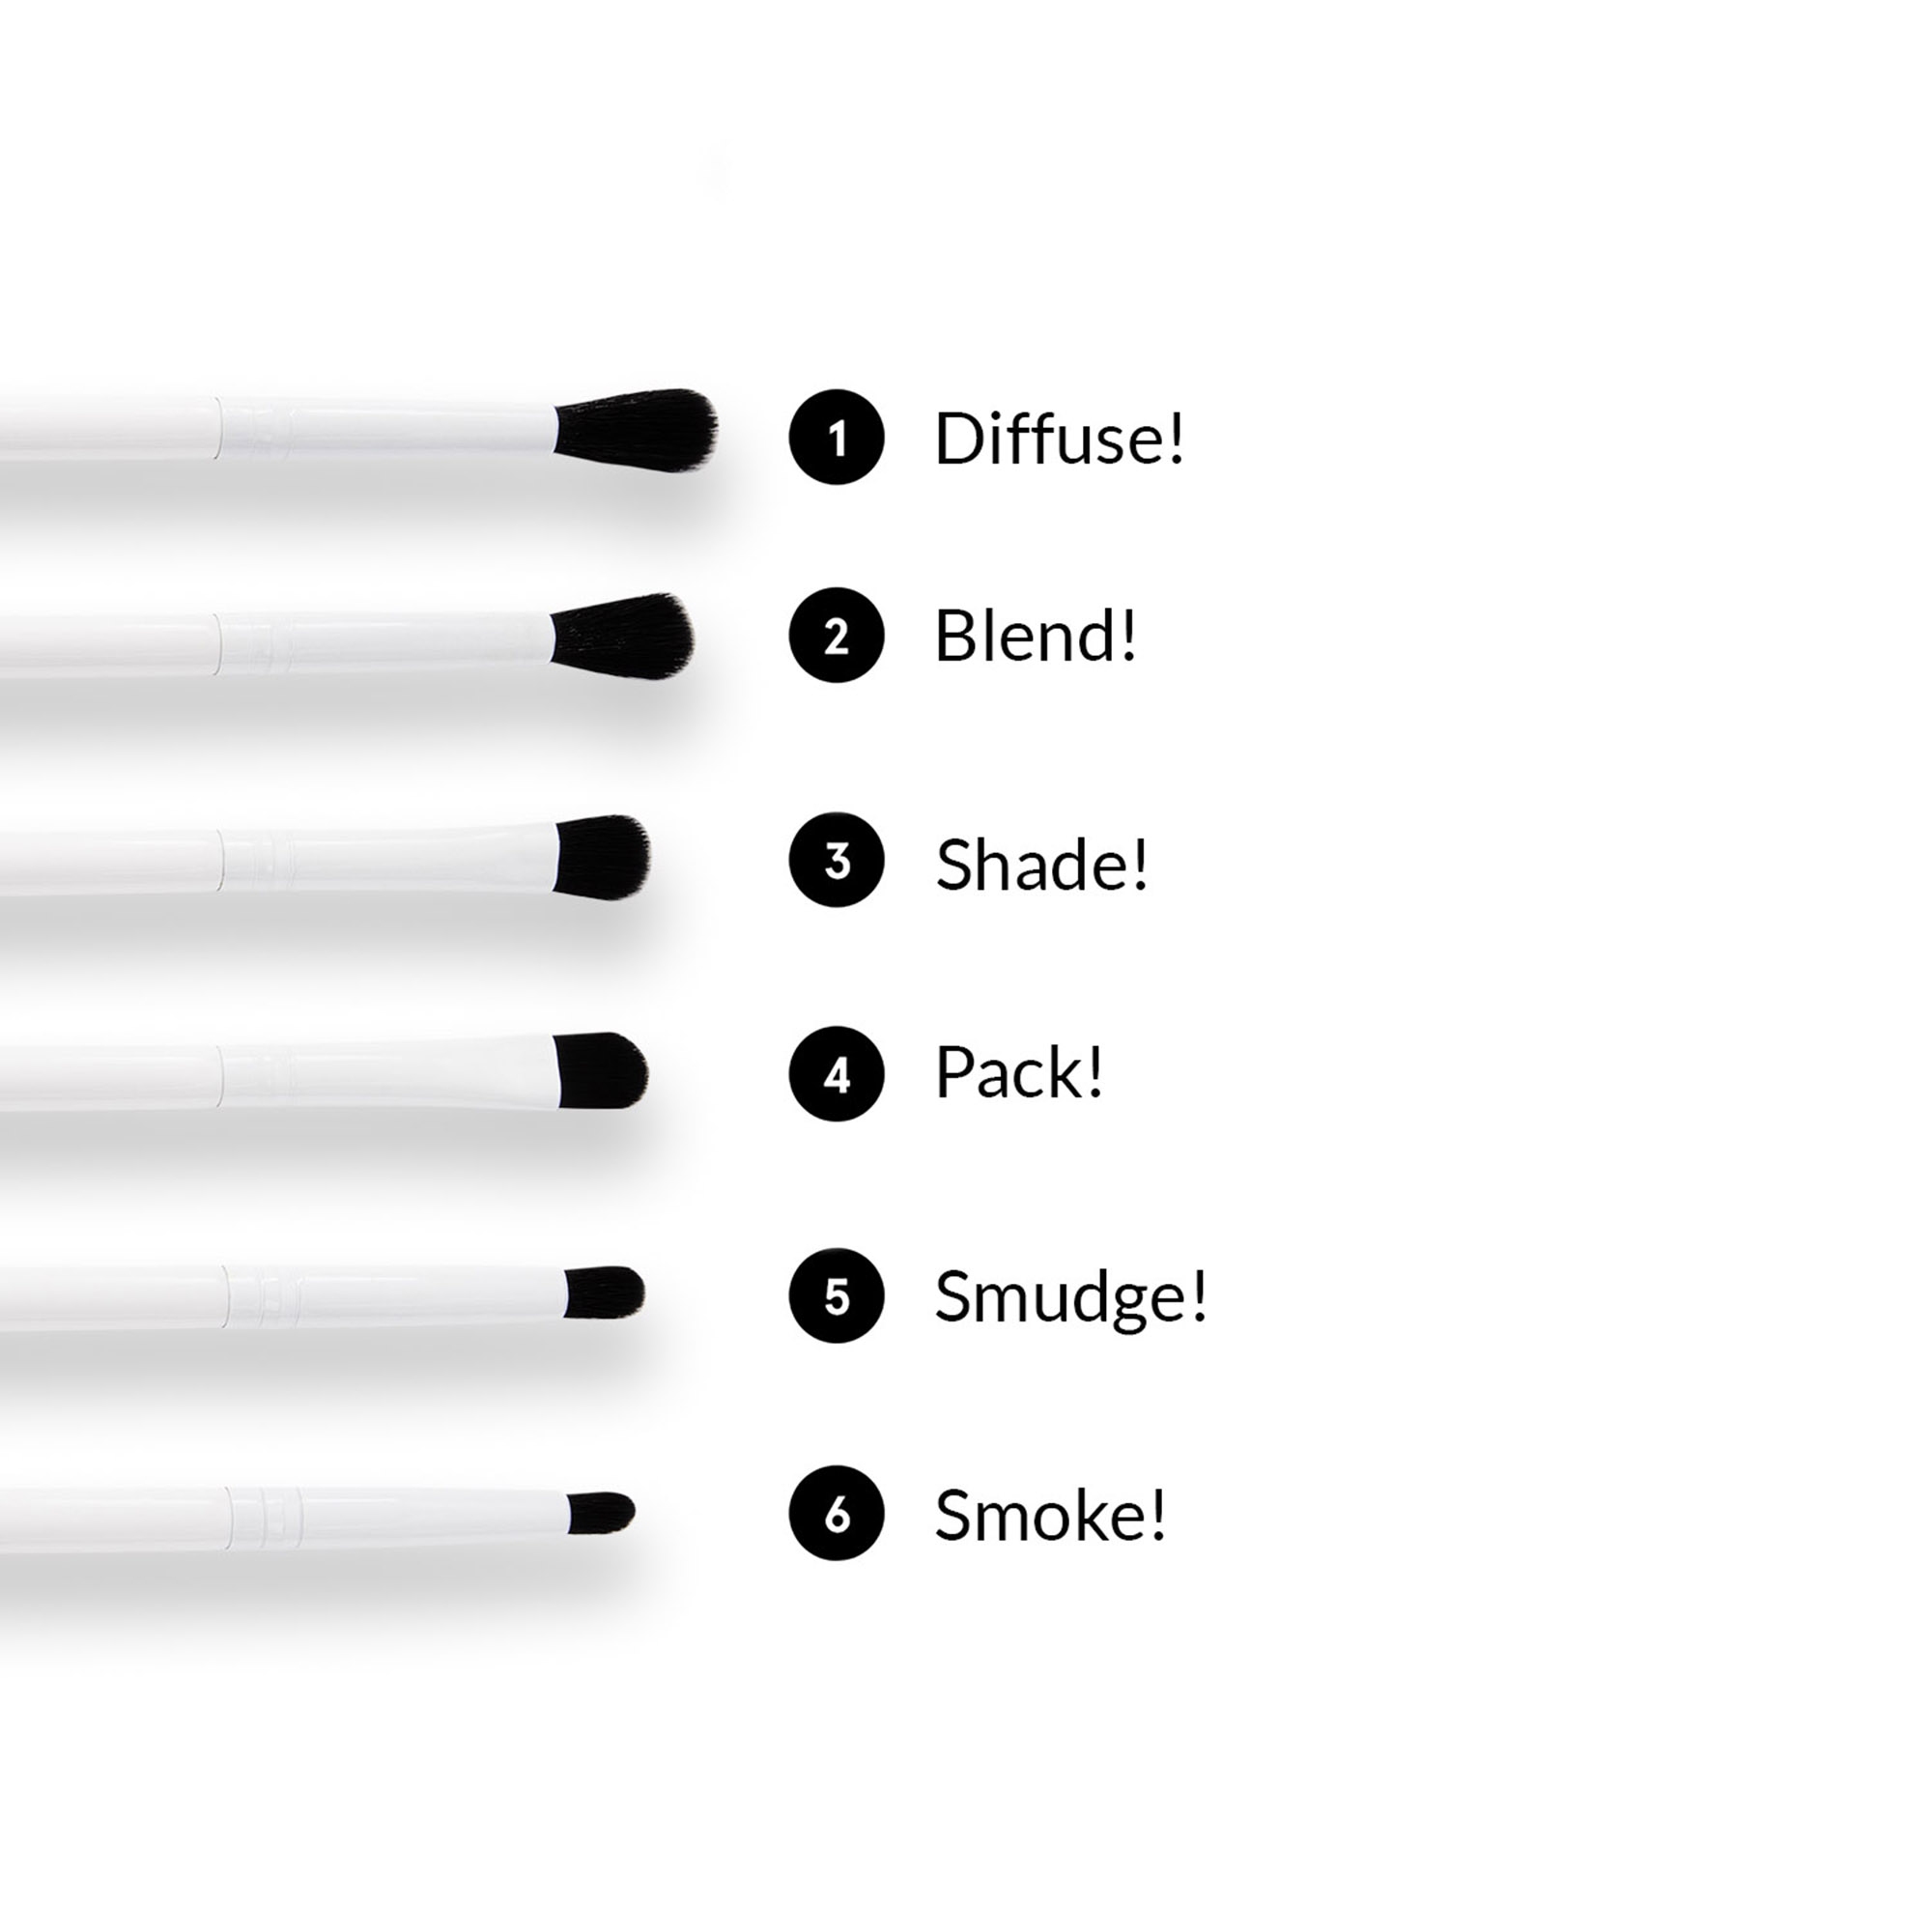 1 Diffuse!, 2 Blend!, 3 Shade!, 4 Pack!, 5 Smudge!, 6 Smoke! 
              